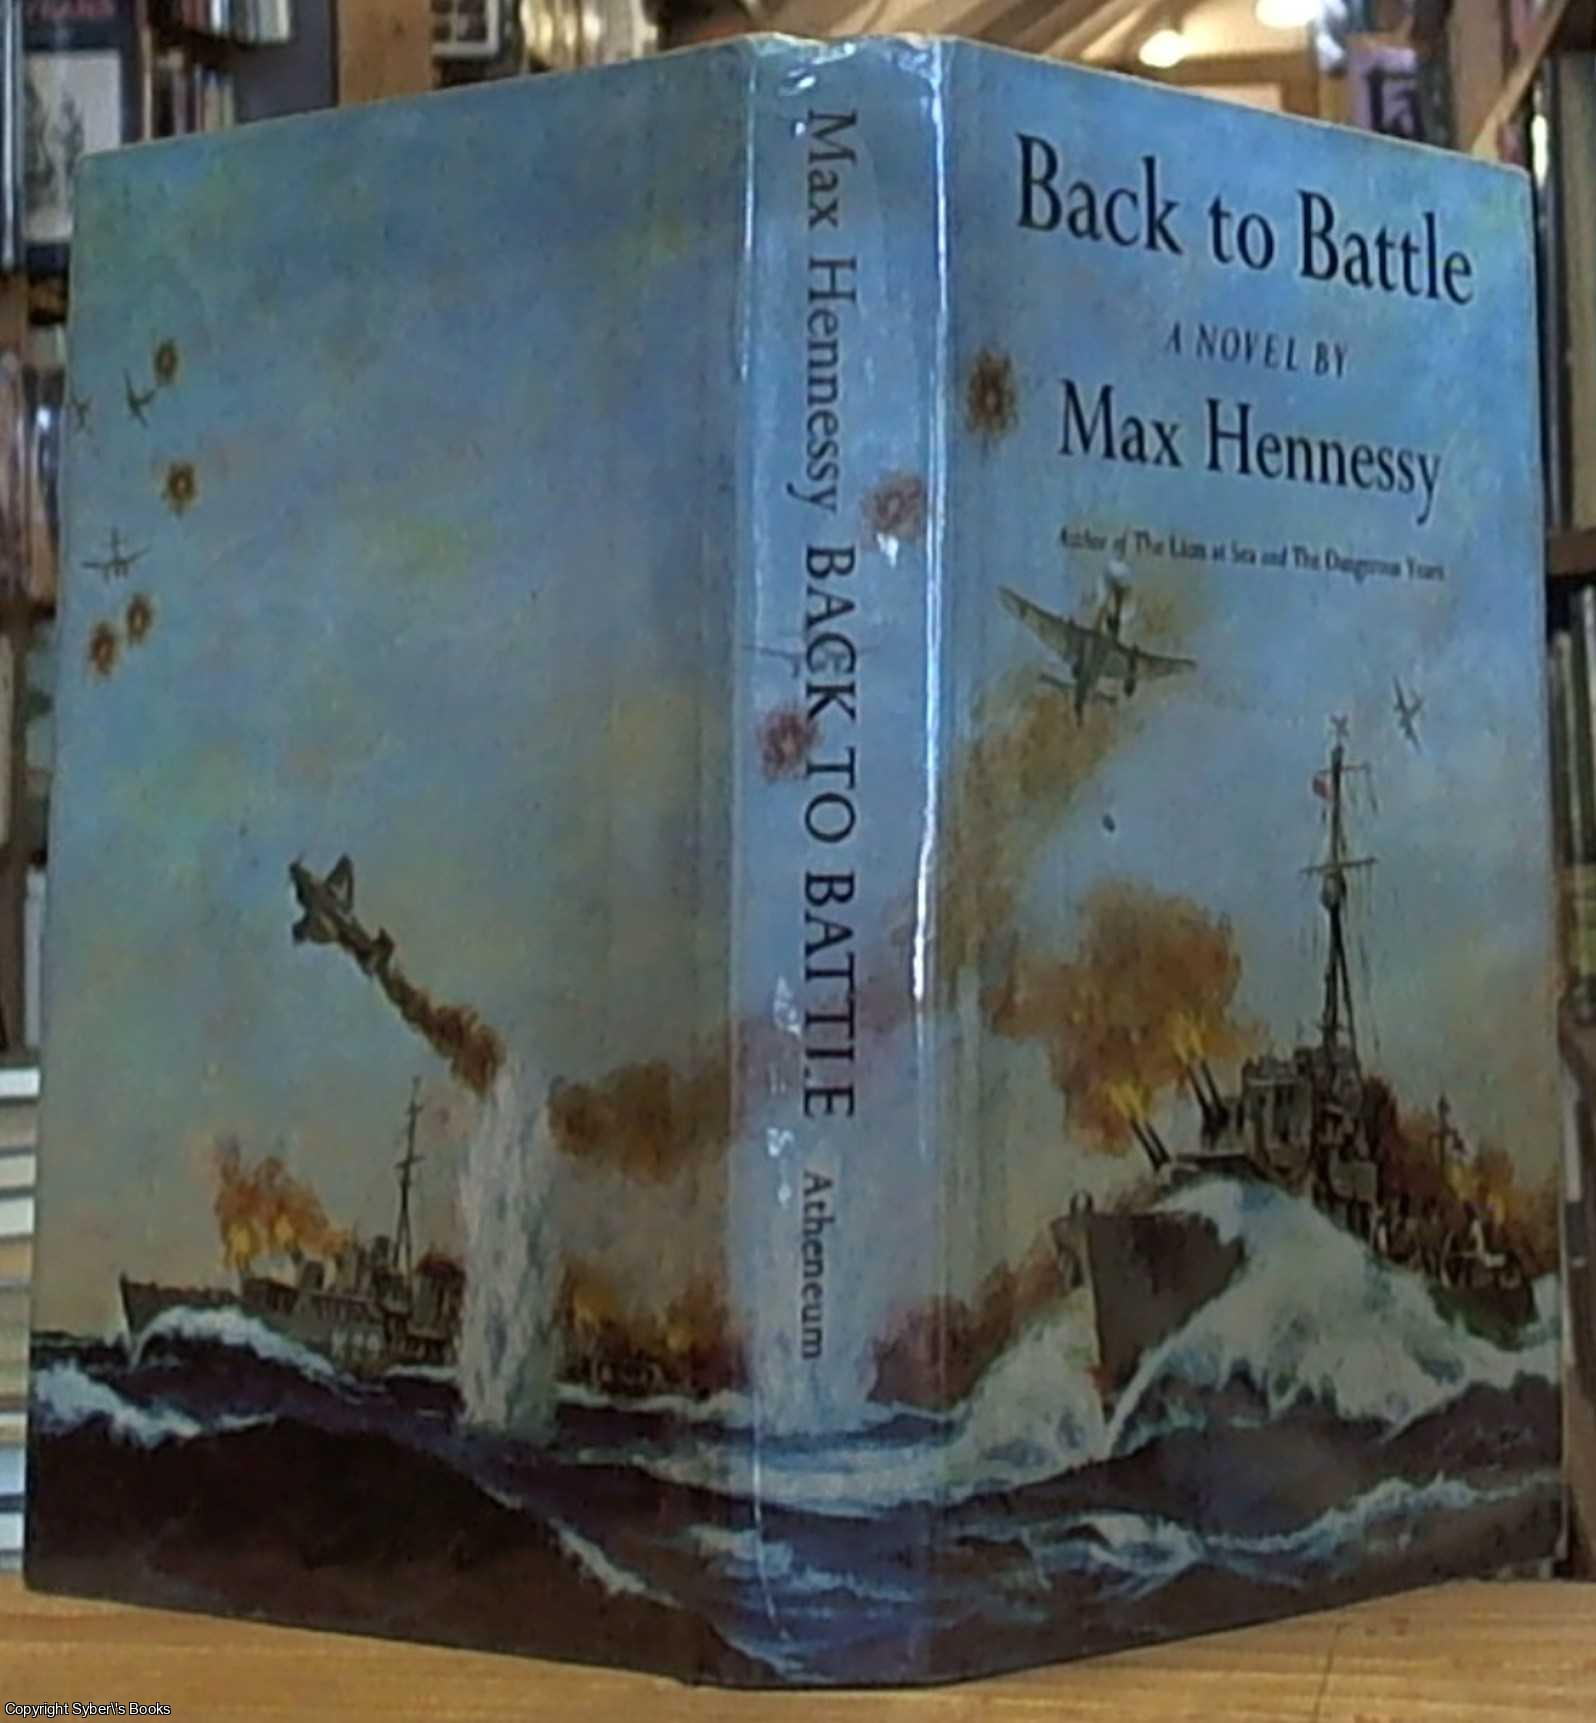 Hennessy, Max (pseudonym of John Harris) - Back to Battle